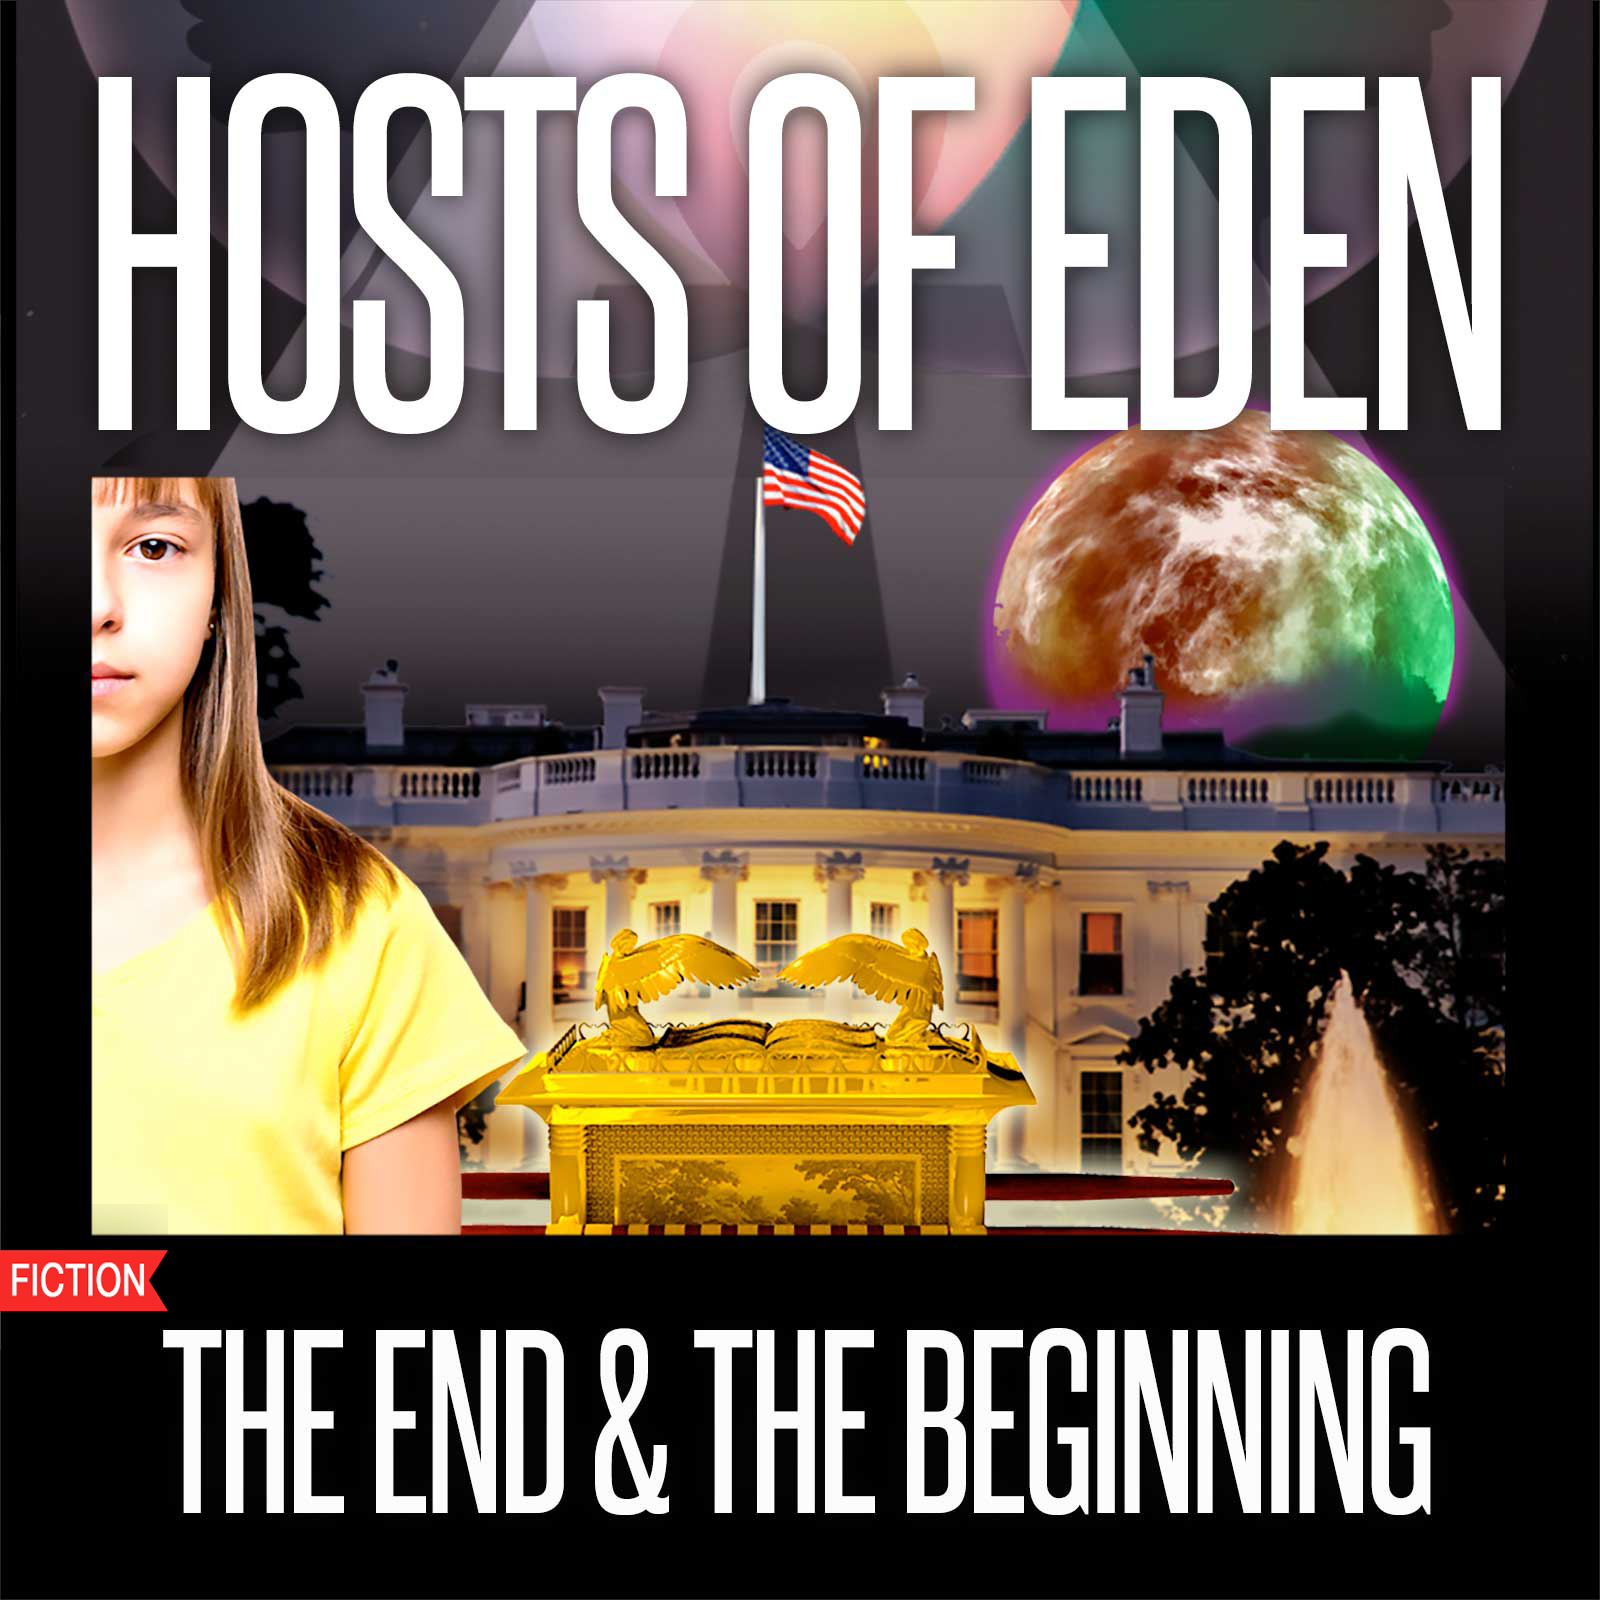 The End & The Beginning